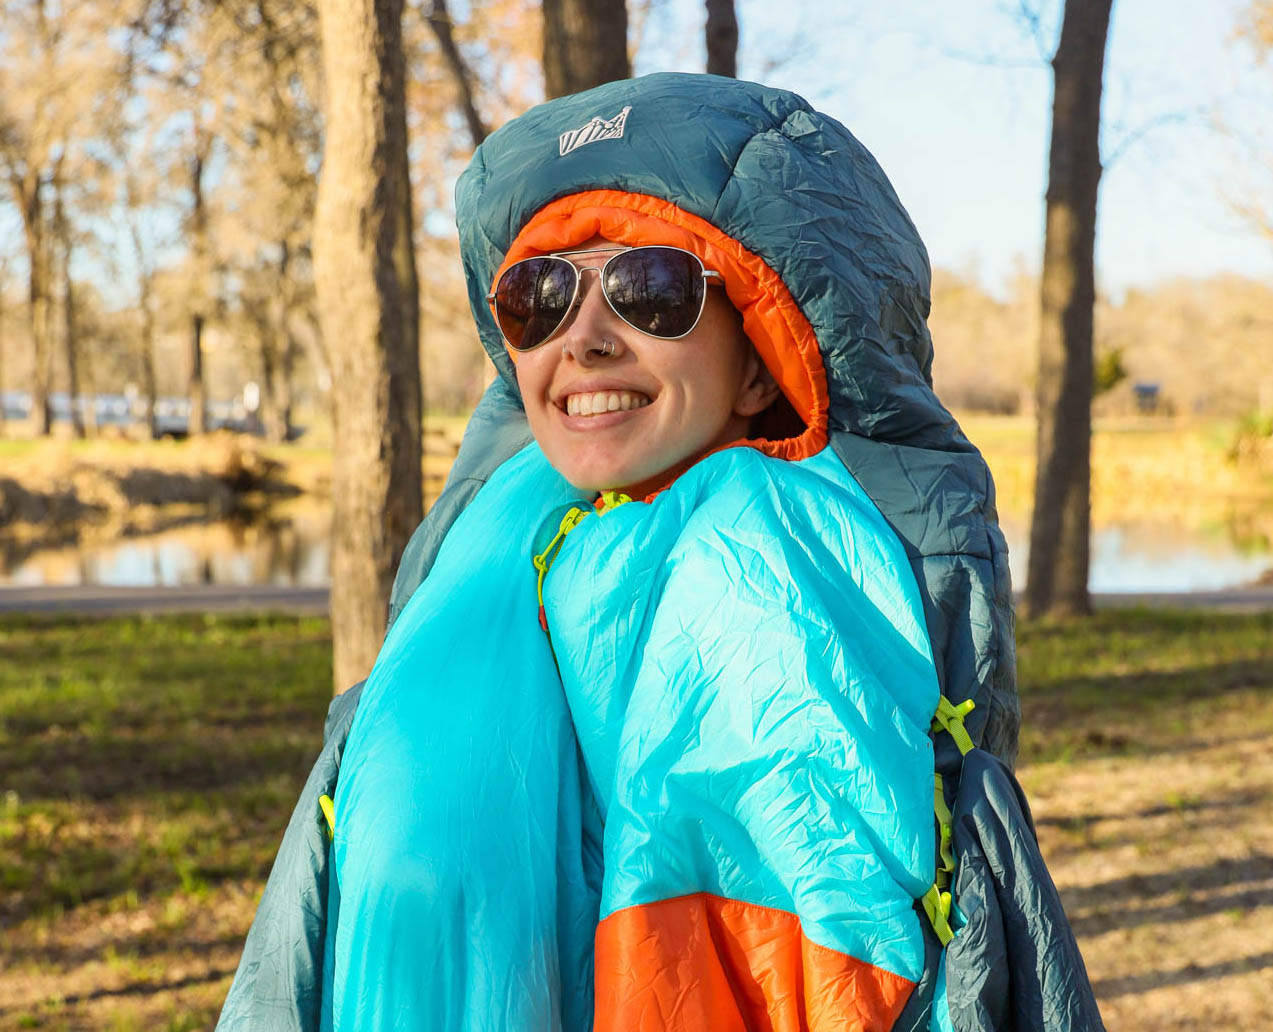 Getting cozy in the UST Monarch sleeping bag.